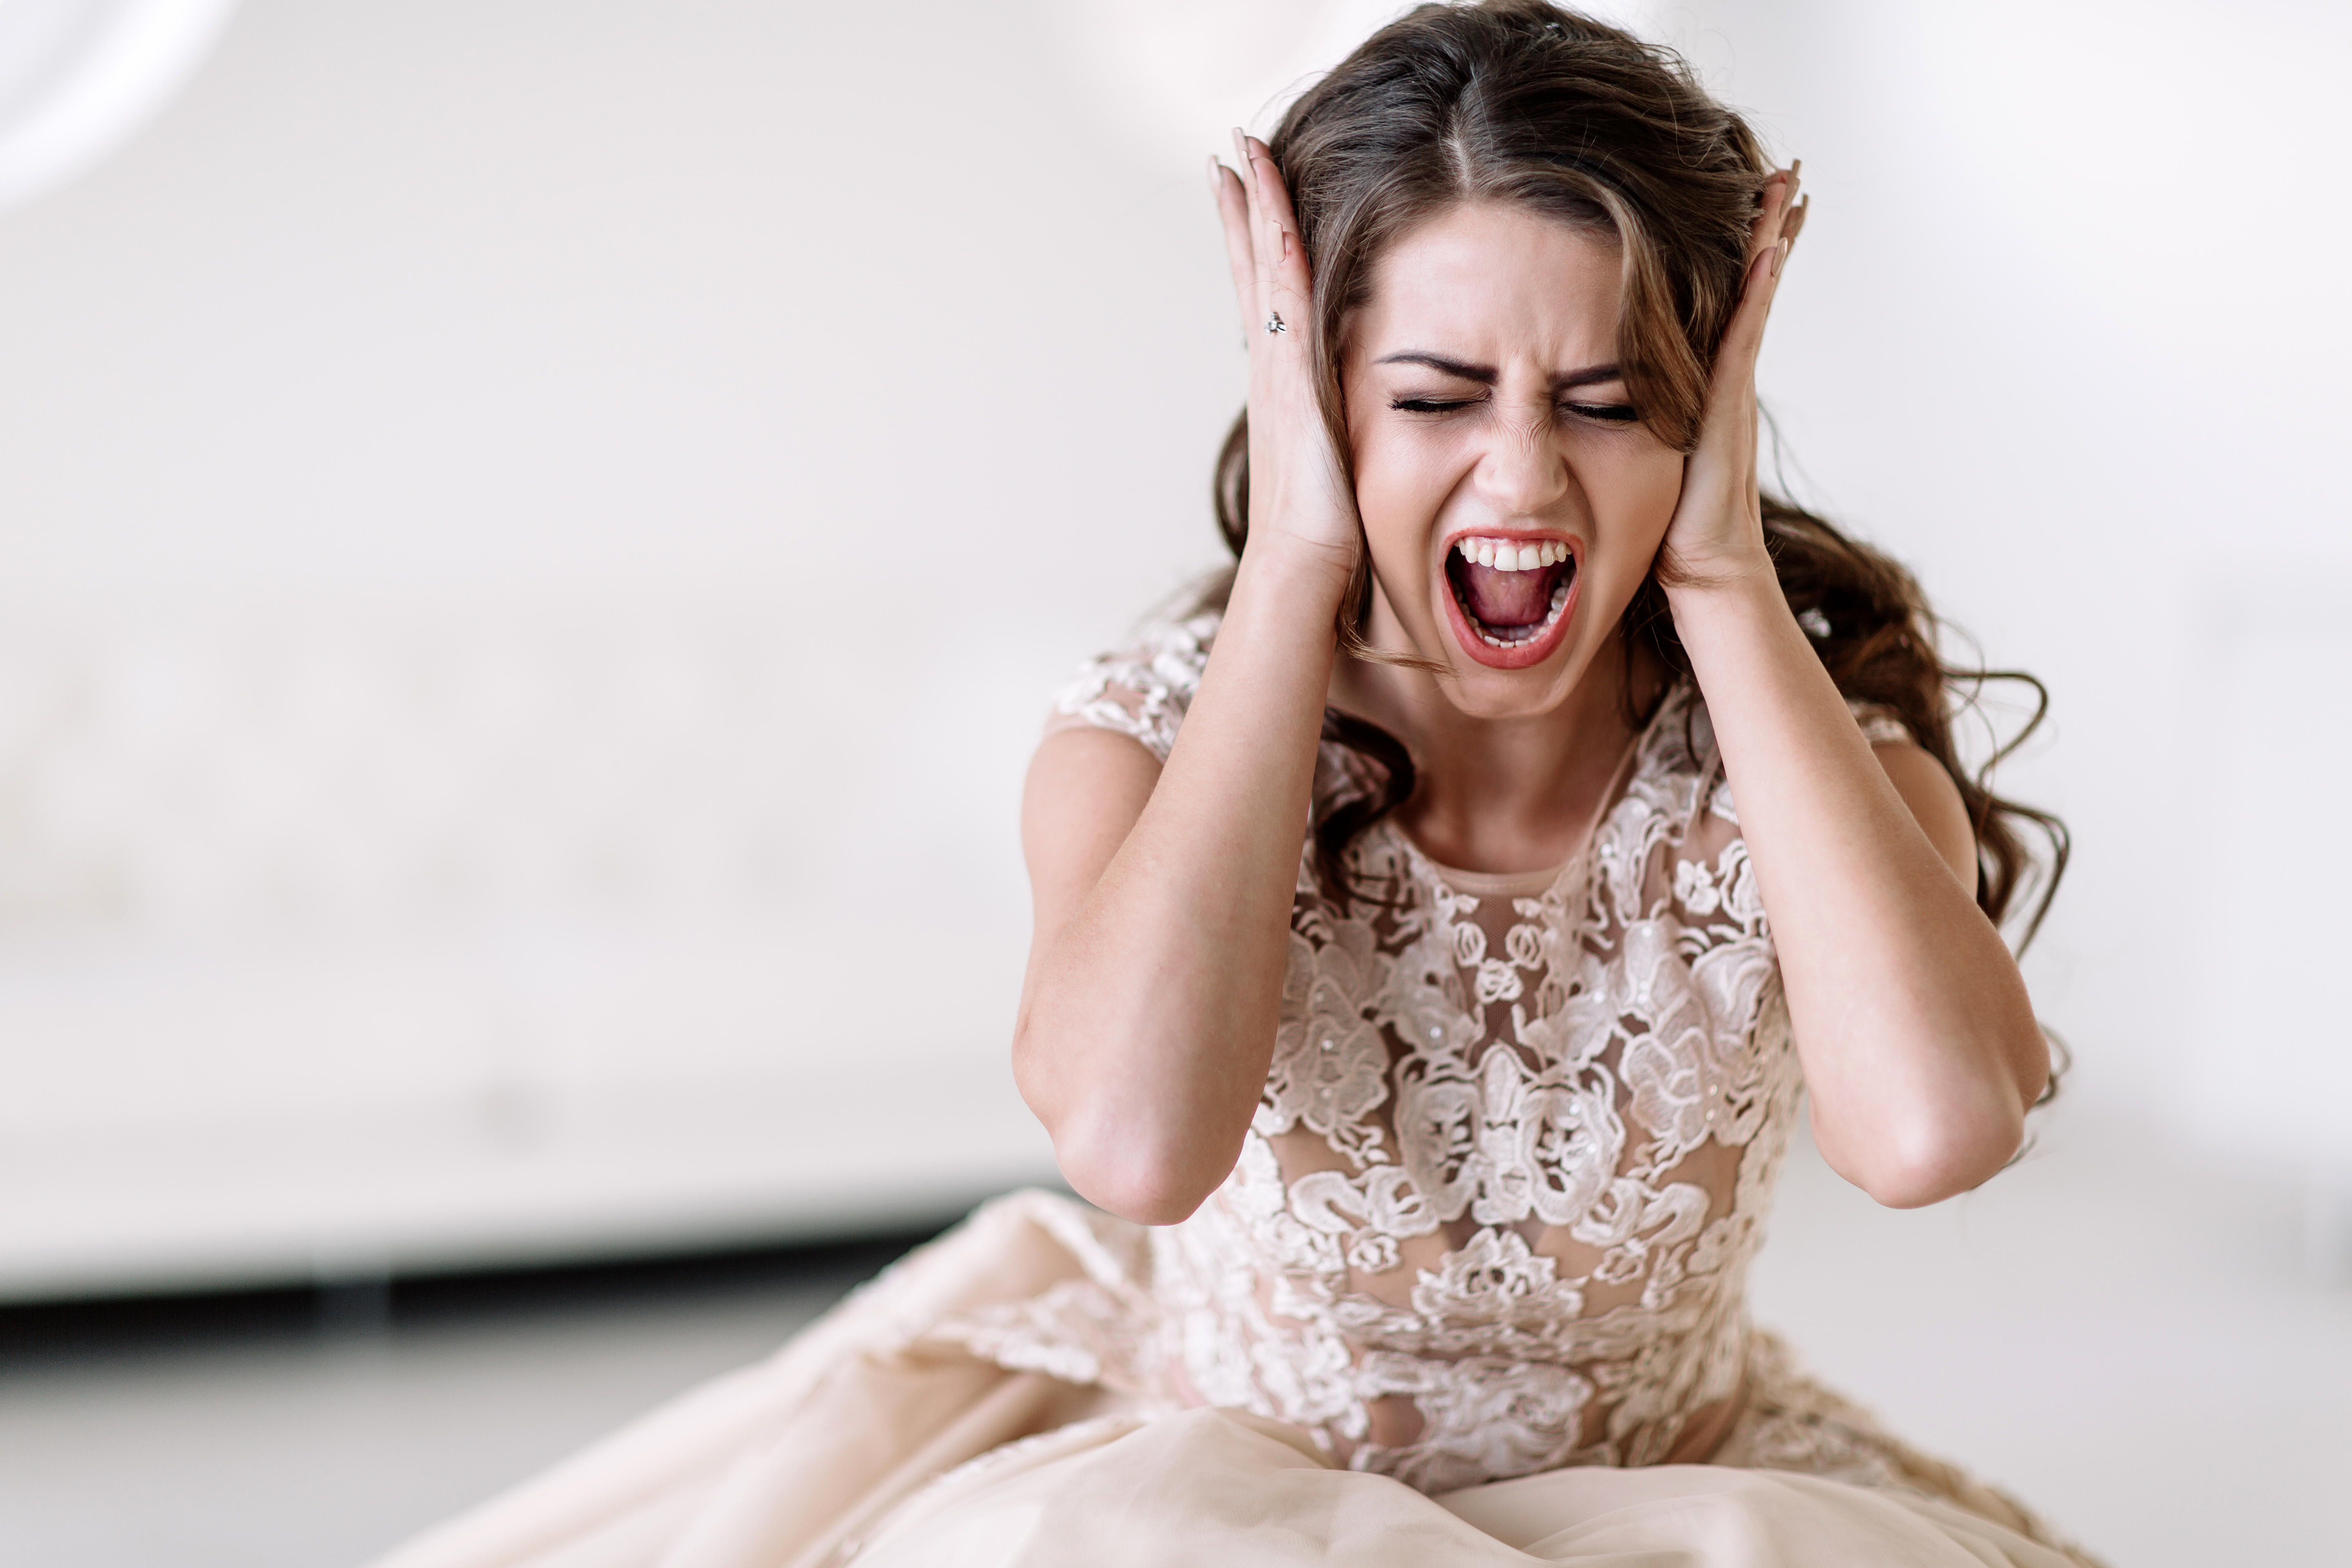 A bride screaming with her hands over her ears | Source: Shutterstock